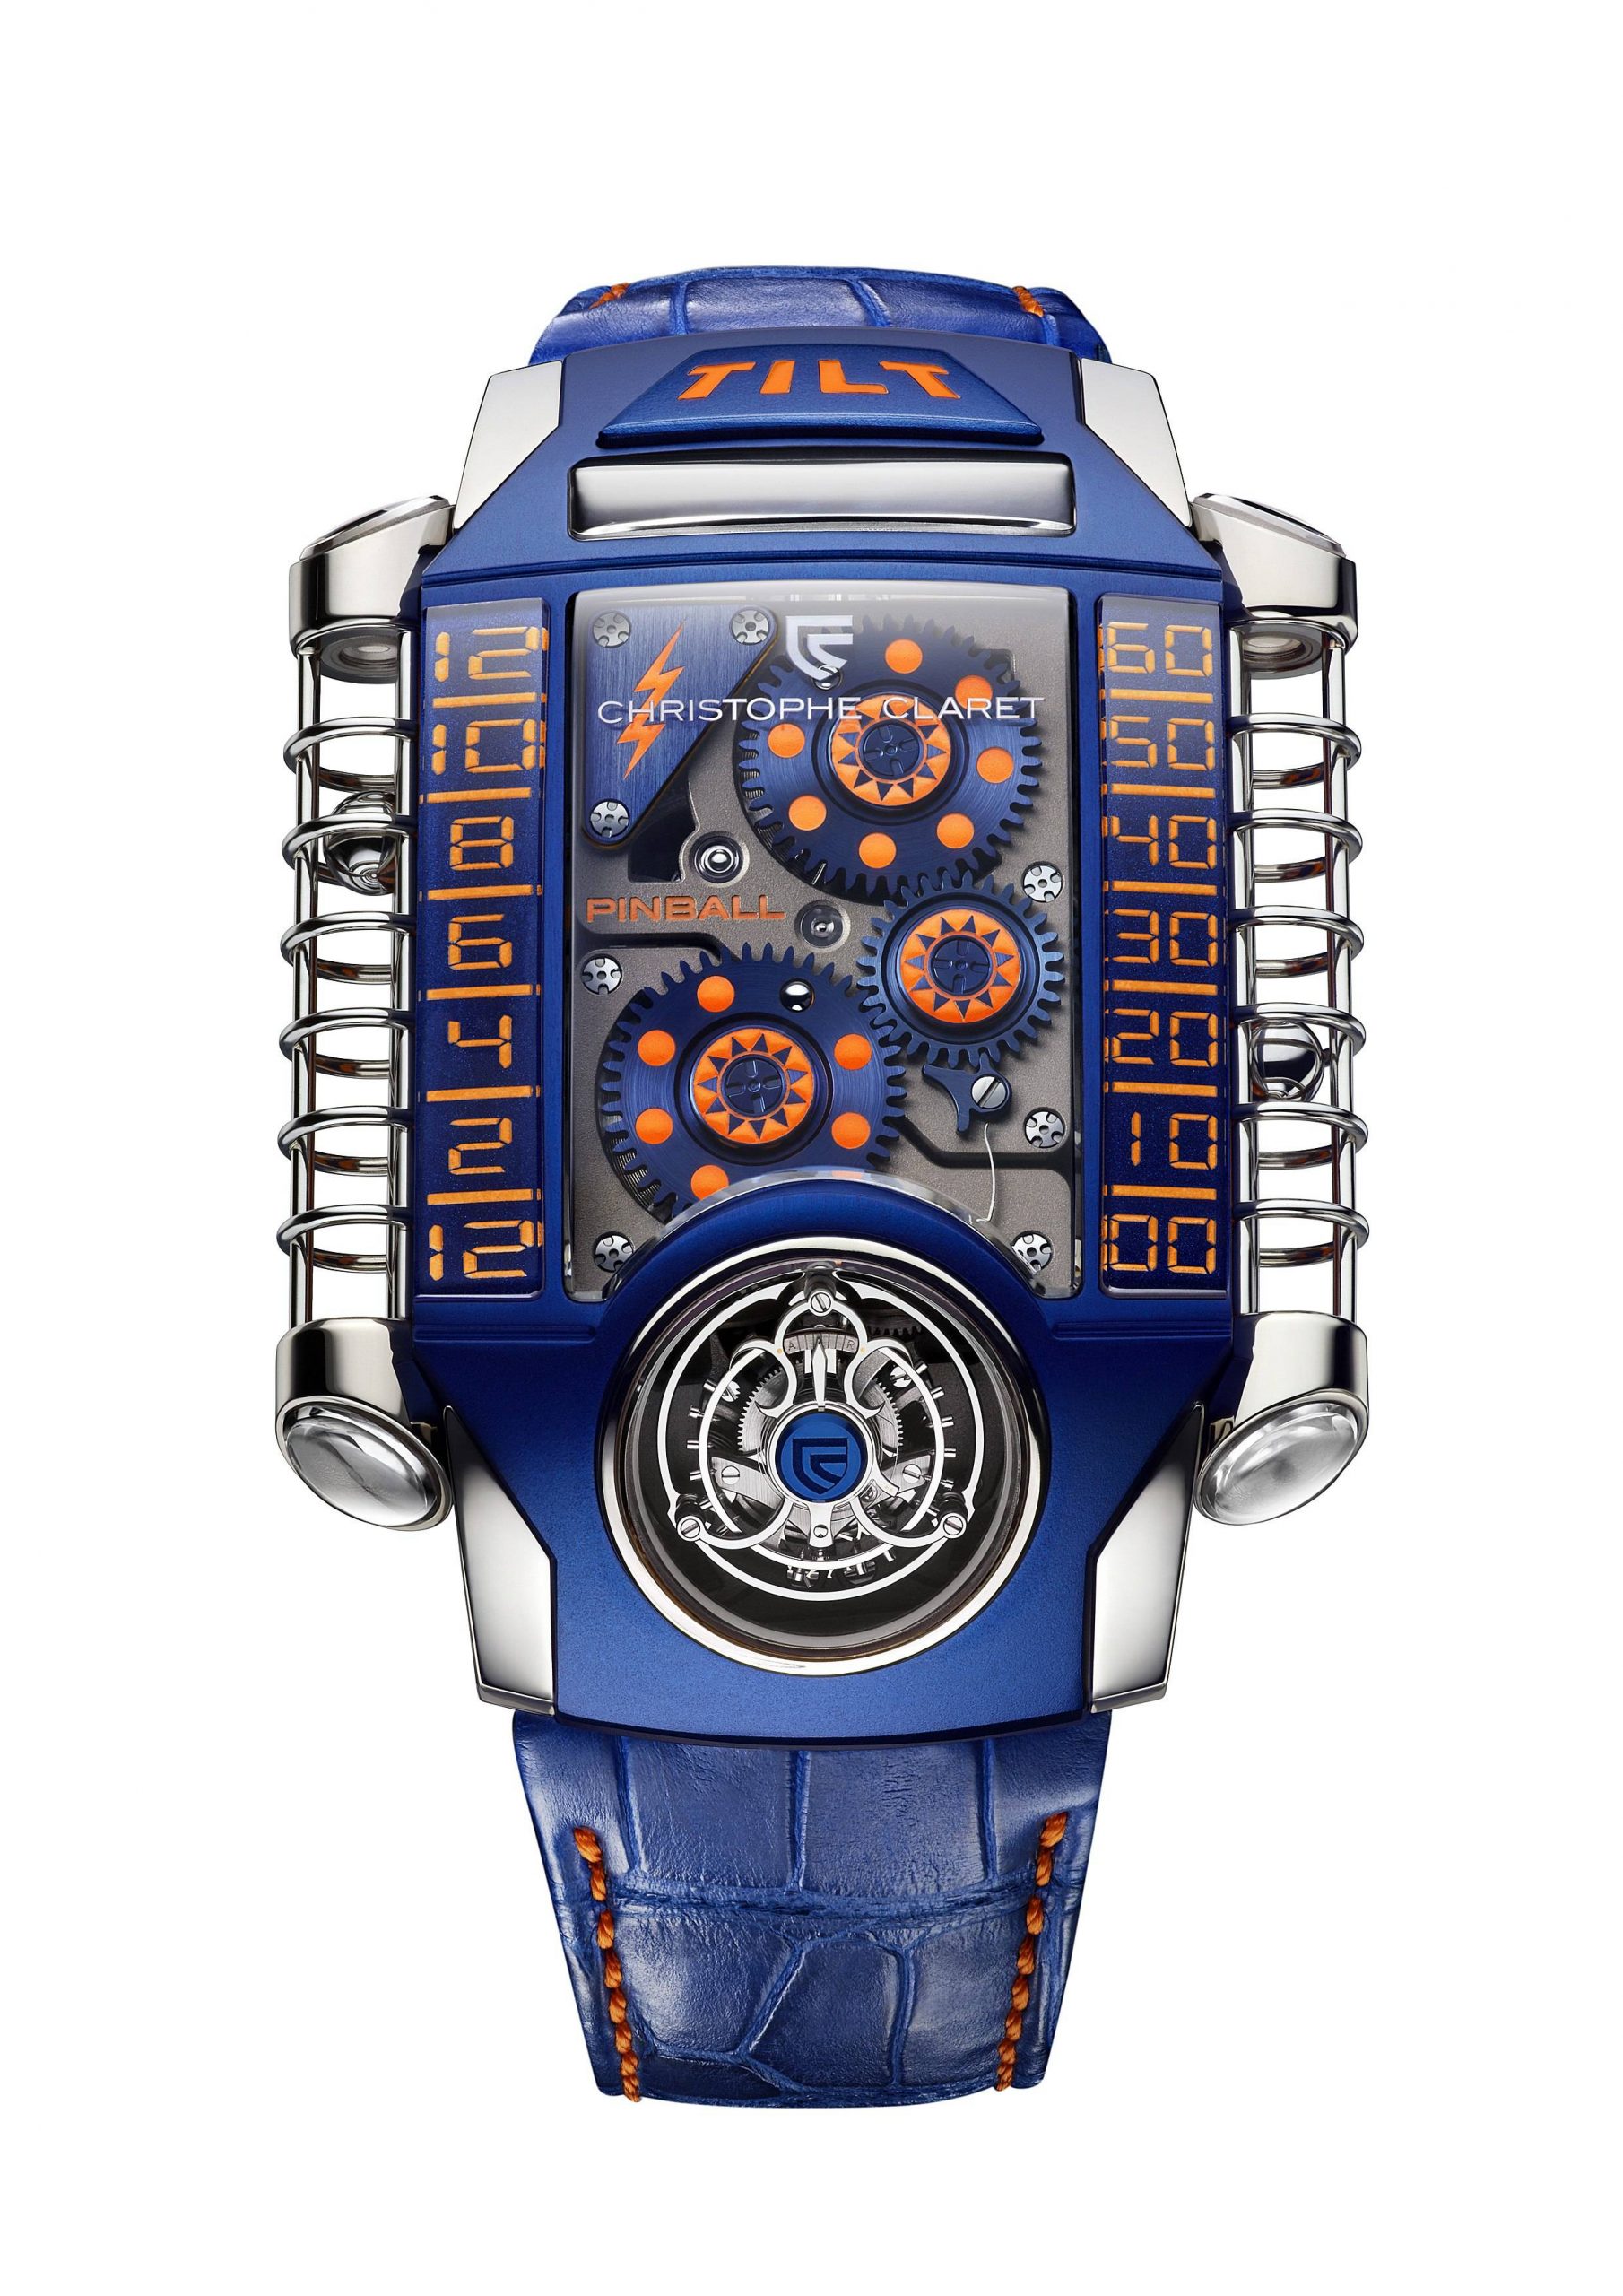 At Auction: The Antiquorum ONLY Watch Auction for Muscular Dystrophy